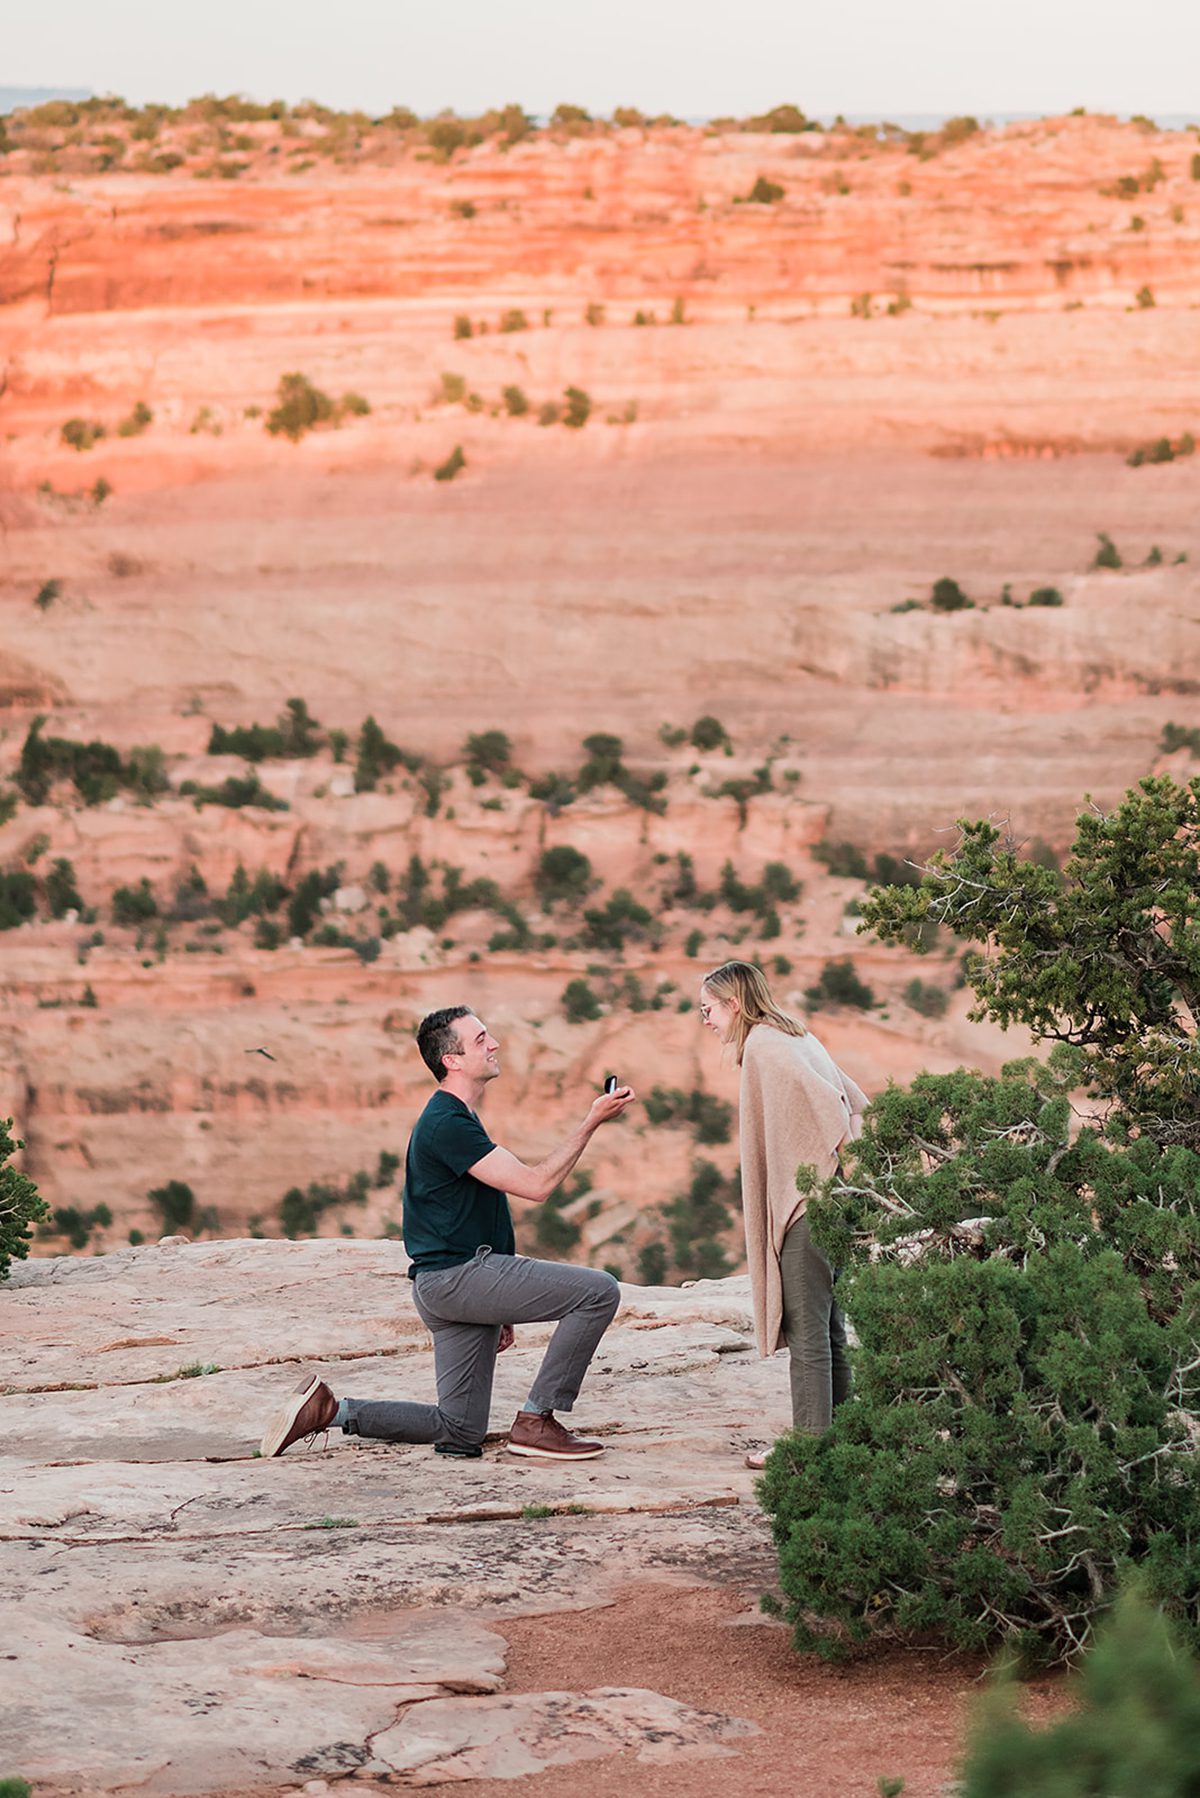 Eric down on one knee while Colette looks surprised | Surprise Proposal at Colorado National Monument